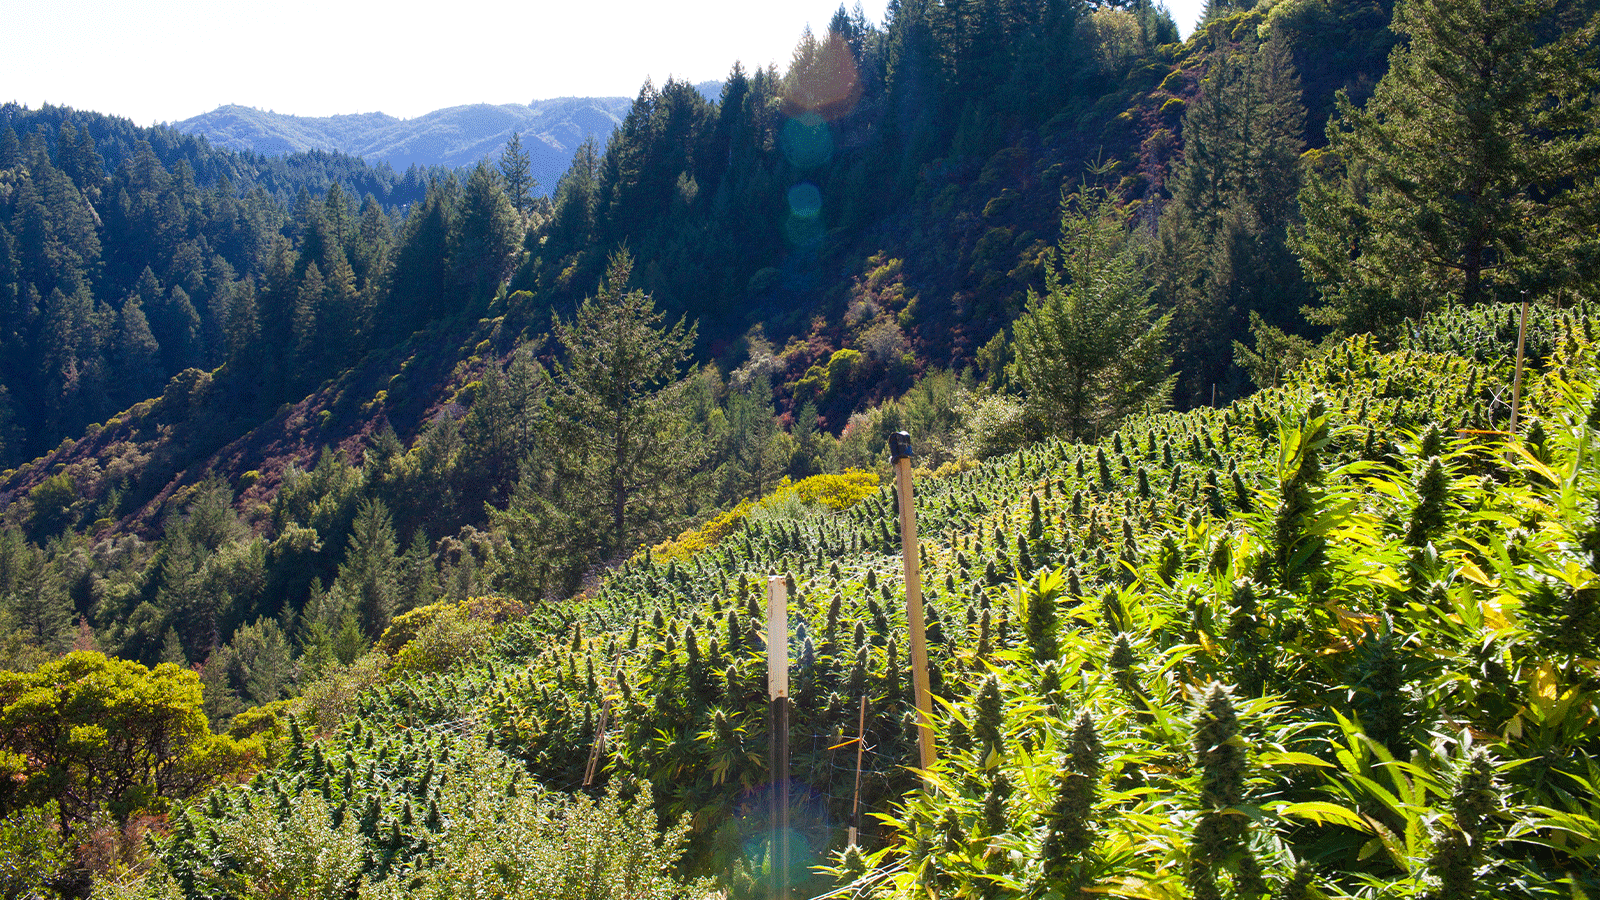 Murder Mountain in Humbolt County, California, is one of the cannabis growing capitals in the United States.